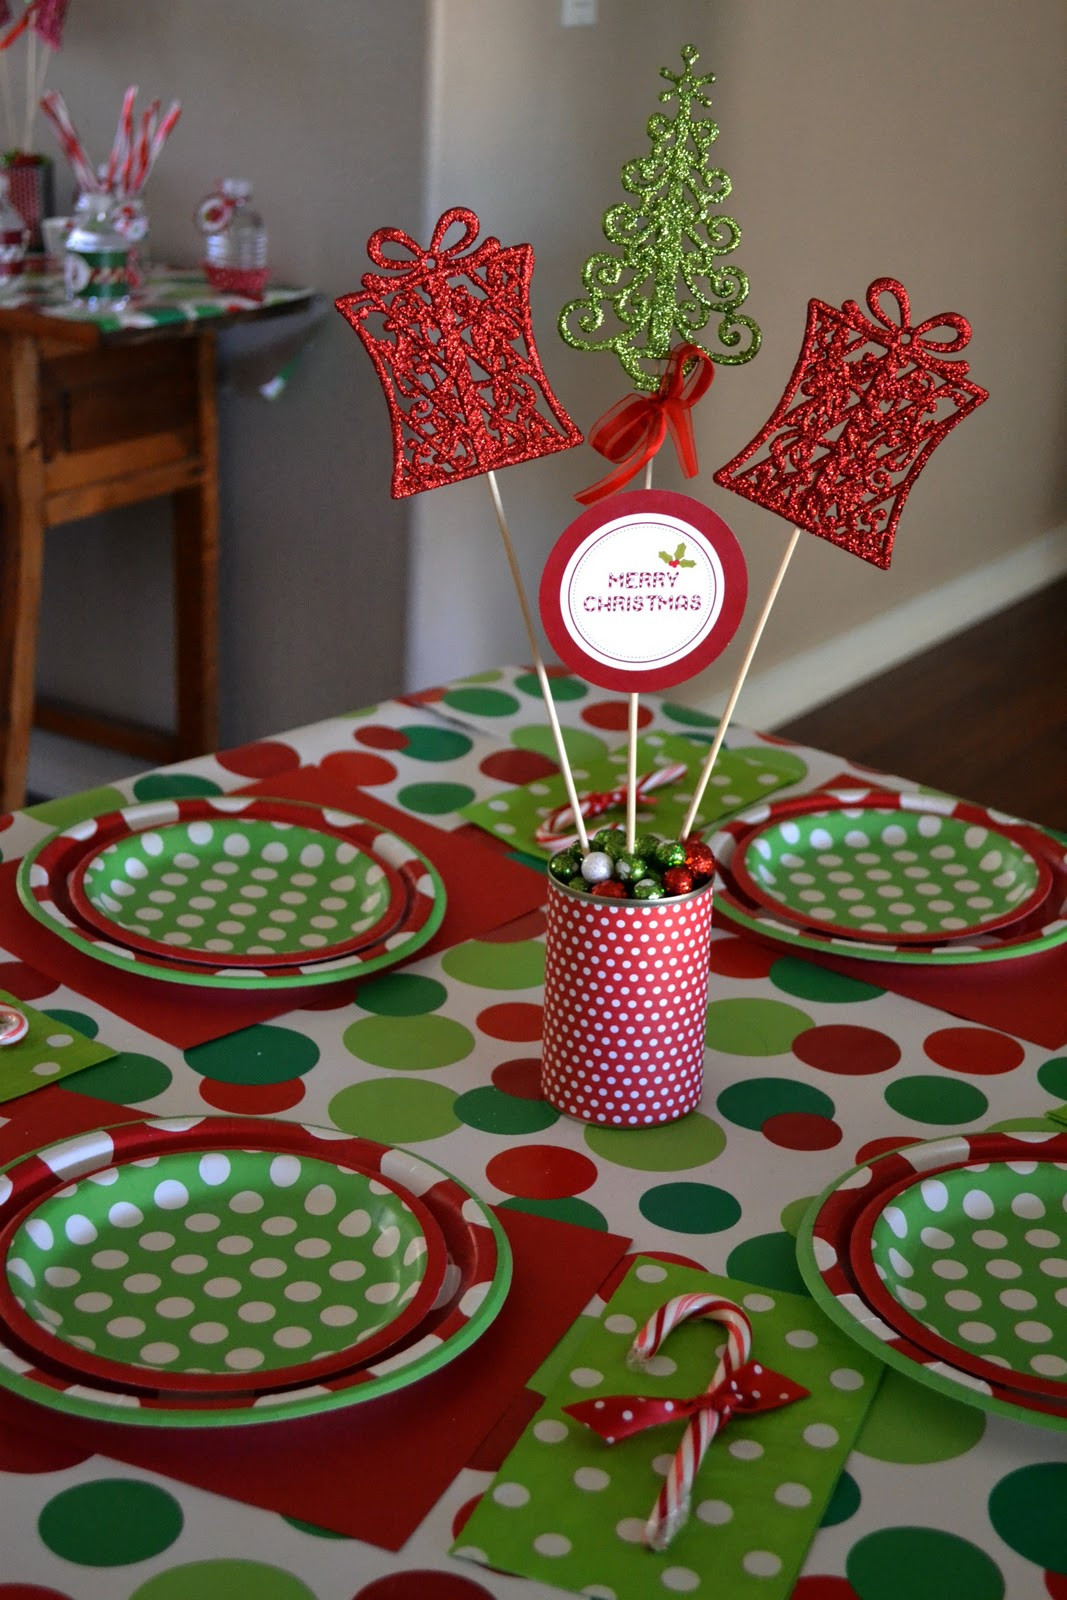 Christmas Party Table Decoration Ideas
 Crissy s Crafts Holly Jolly Holiday Party